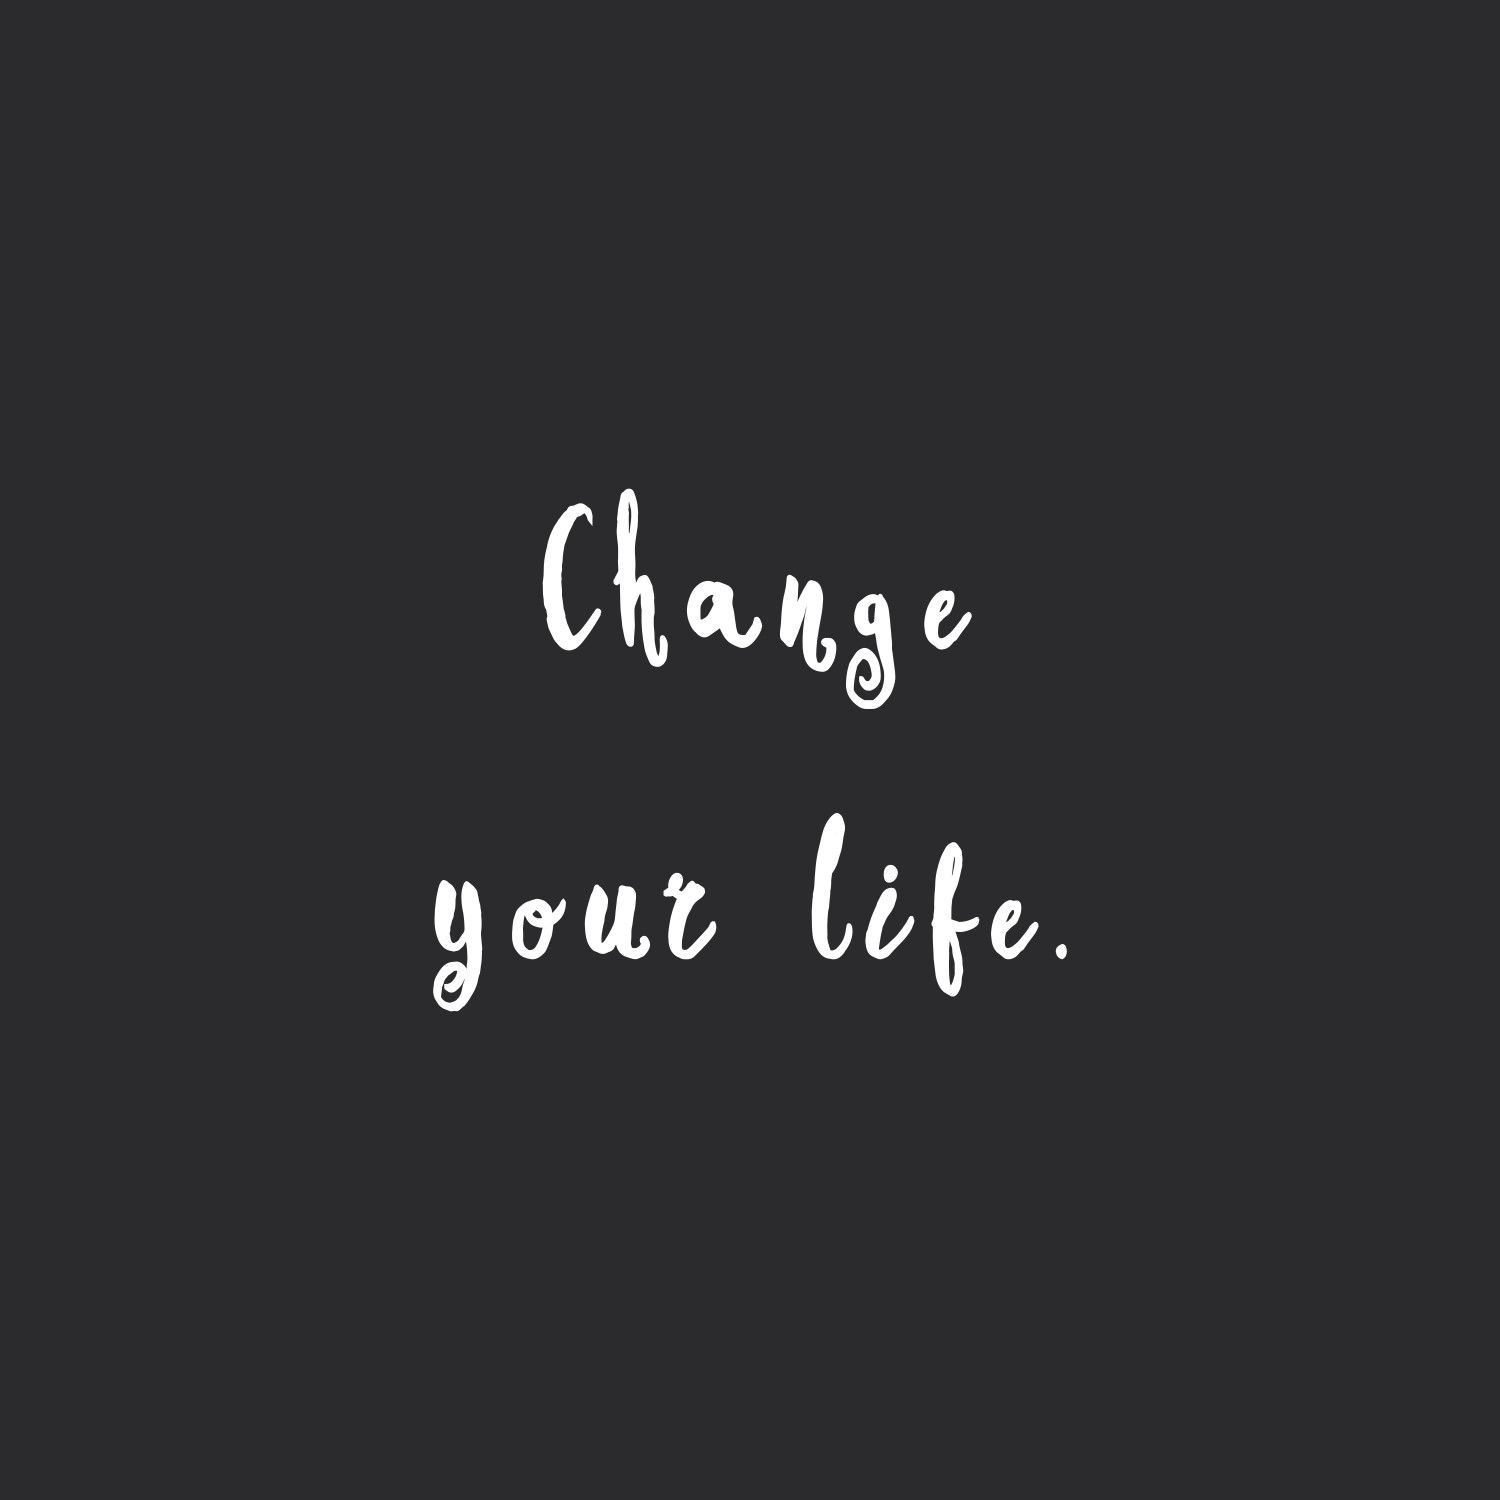 Change your life! Browse our collection of exercise and fitness inspirational quotes and get instant weight loss and training motivation. Transform positive thoughts into positive actions and get fit, healthy and happy! https://www.spotebi.com/workout-motivation/change-your-life/